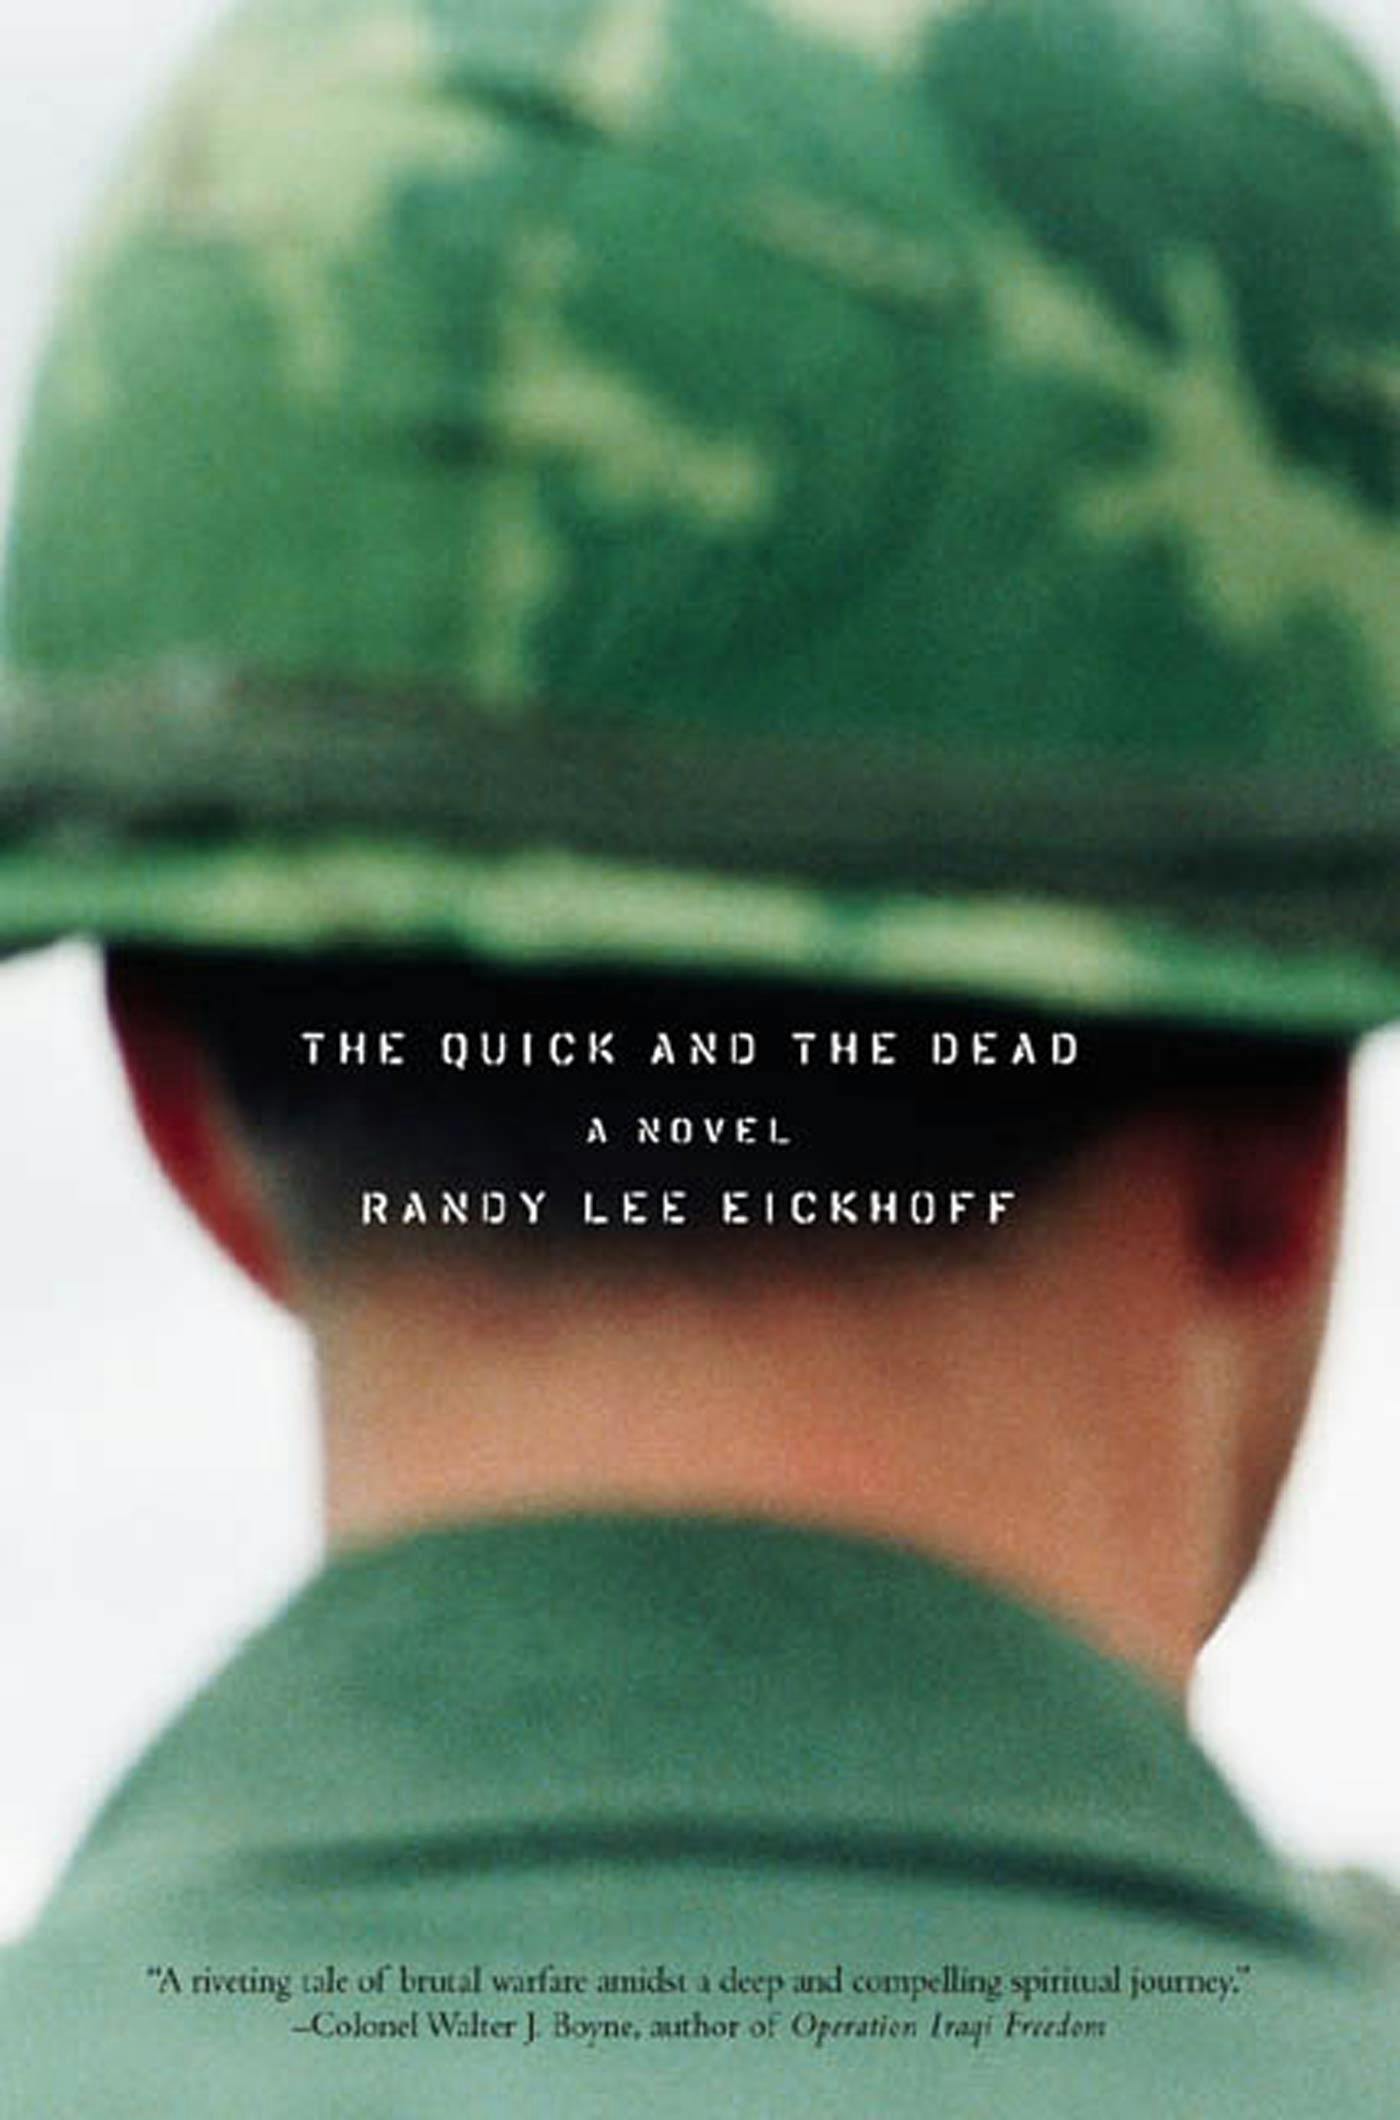 Cover for the book titled as: The Quick and the Dead